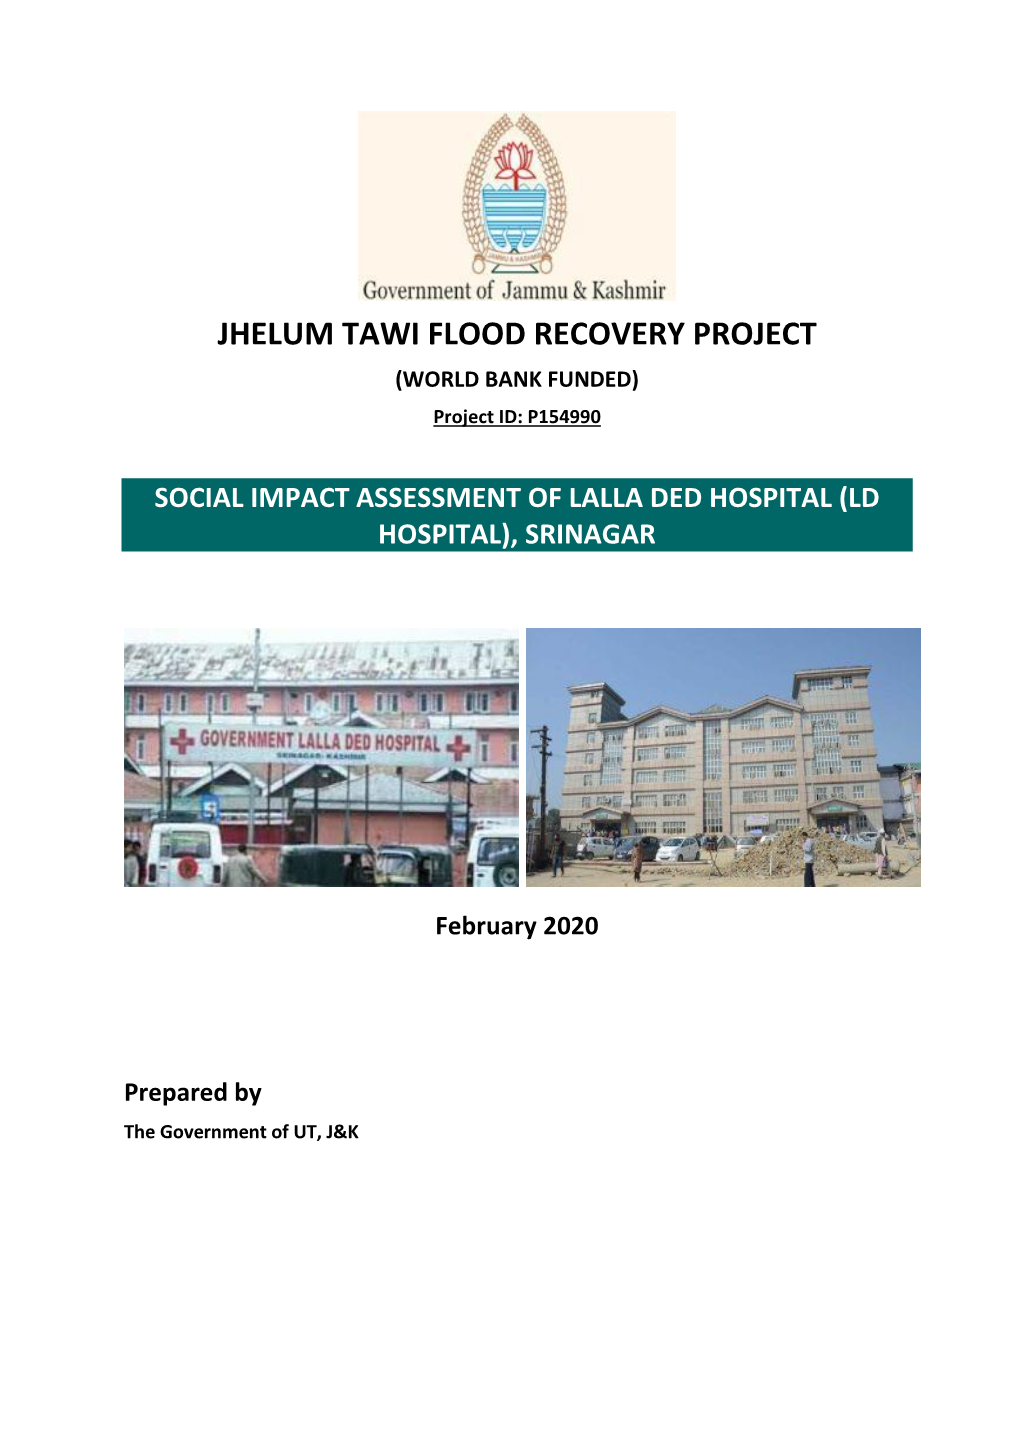 JHELUM TAWI FLOOD RECOVERY PROJECT (WORLD BANK FUNDED) Project ID: P154990